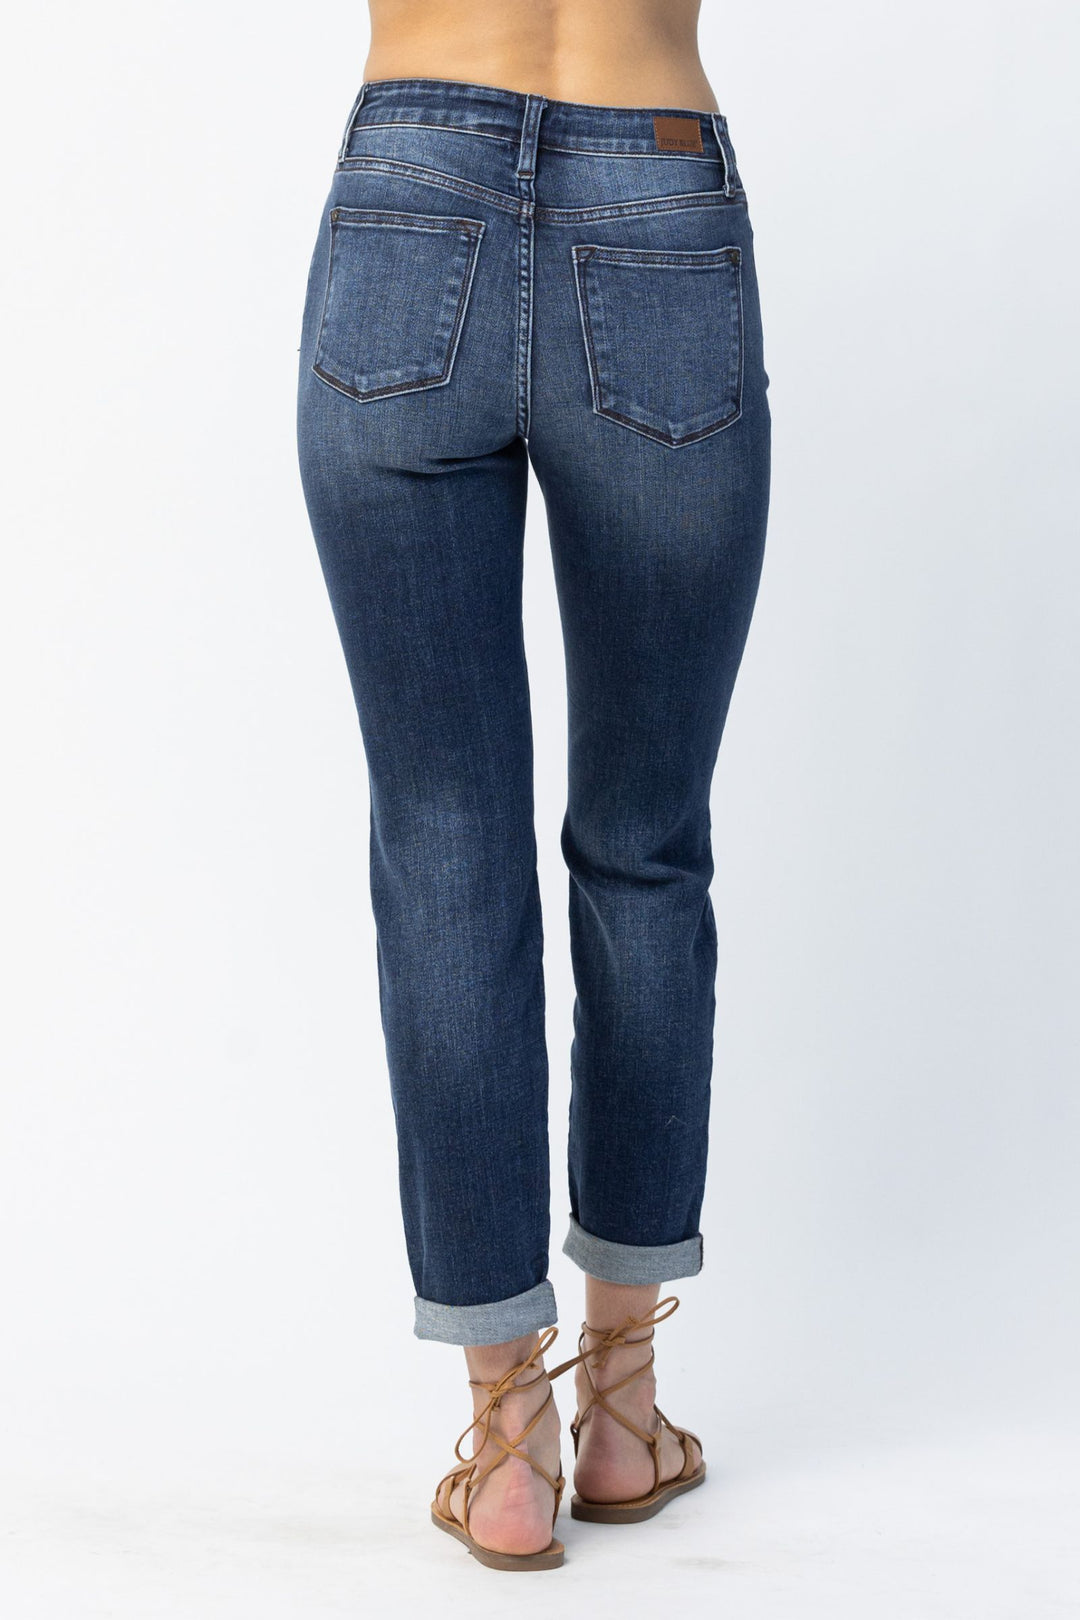 Jade Basic Cuffed Slim Fit Denim, Judy Blue-Denim-Inspired by Justeen-Women's Clothing Boutique in Chicago, Illinois